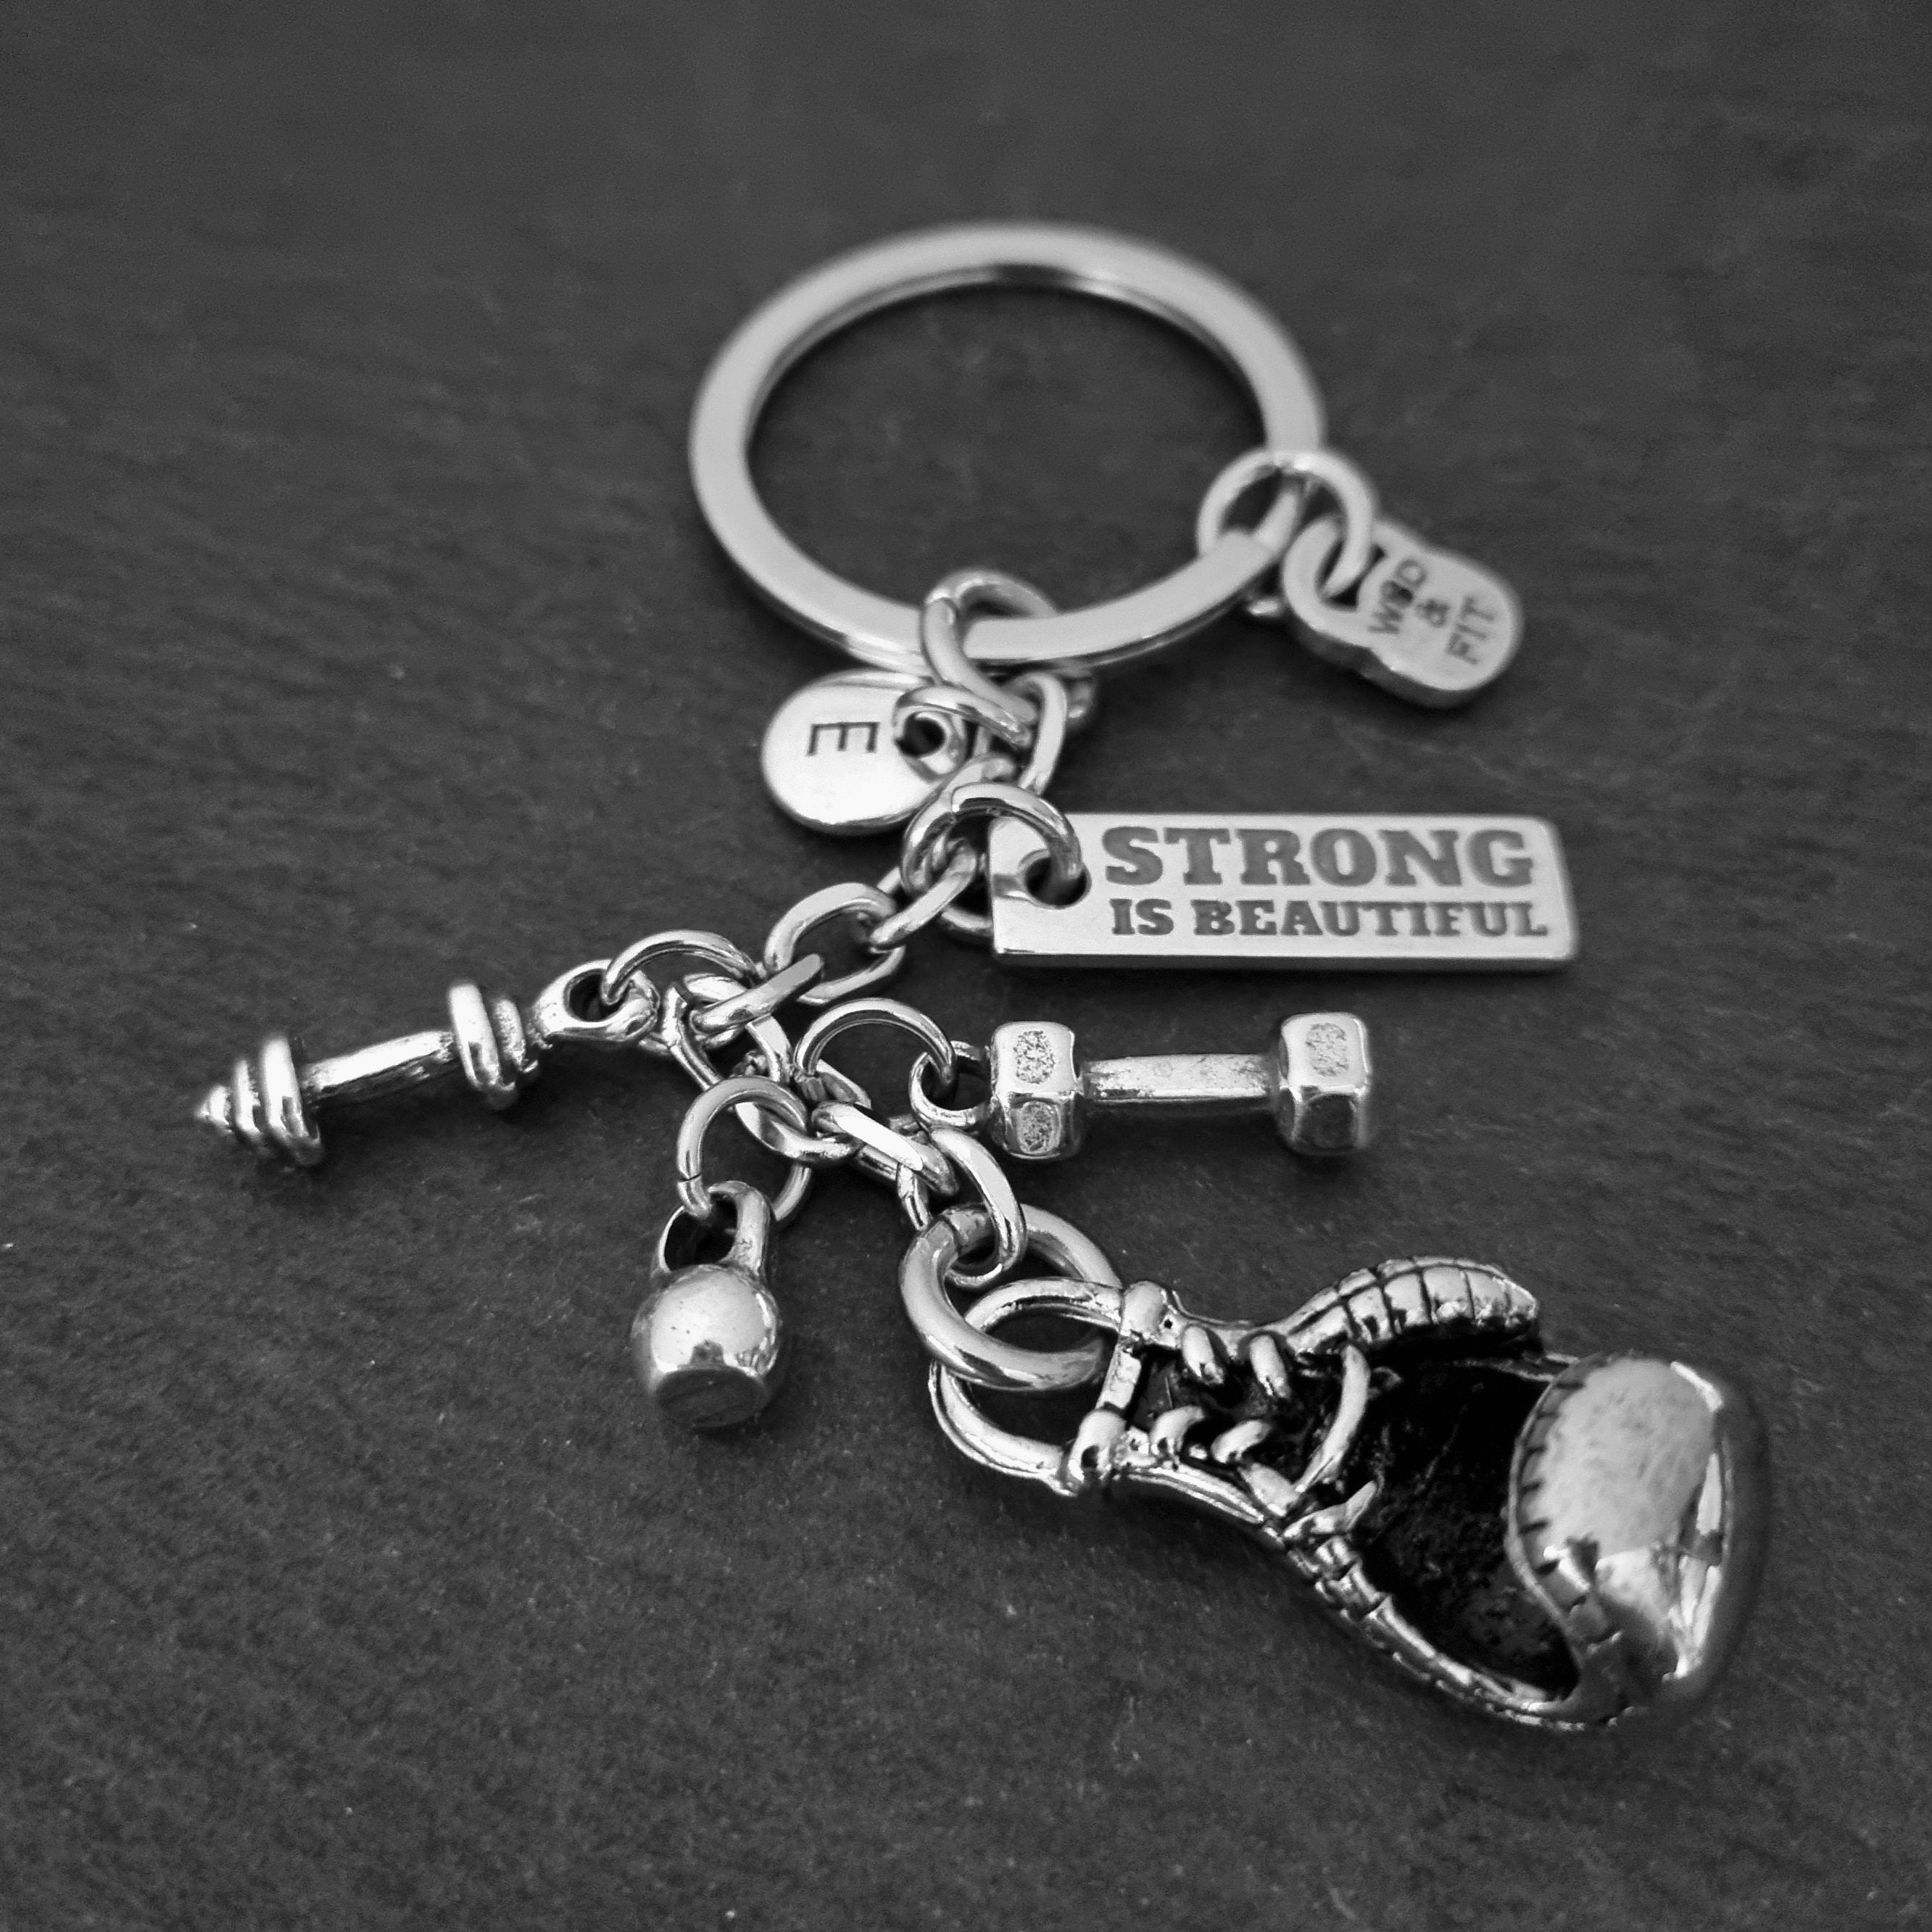 Never Give Up! - Boxing Gloves Keychain Key Ring Fighting Fighter Strong  Gift